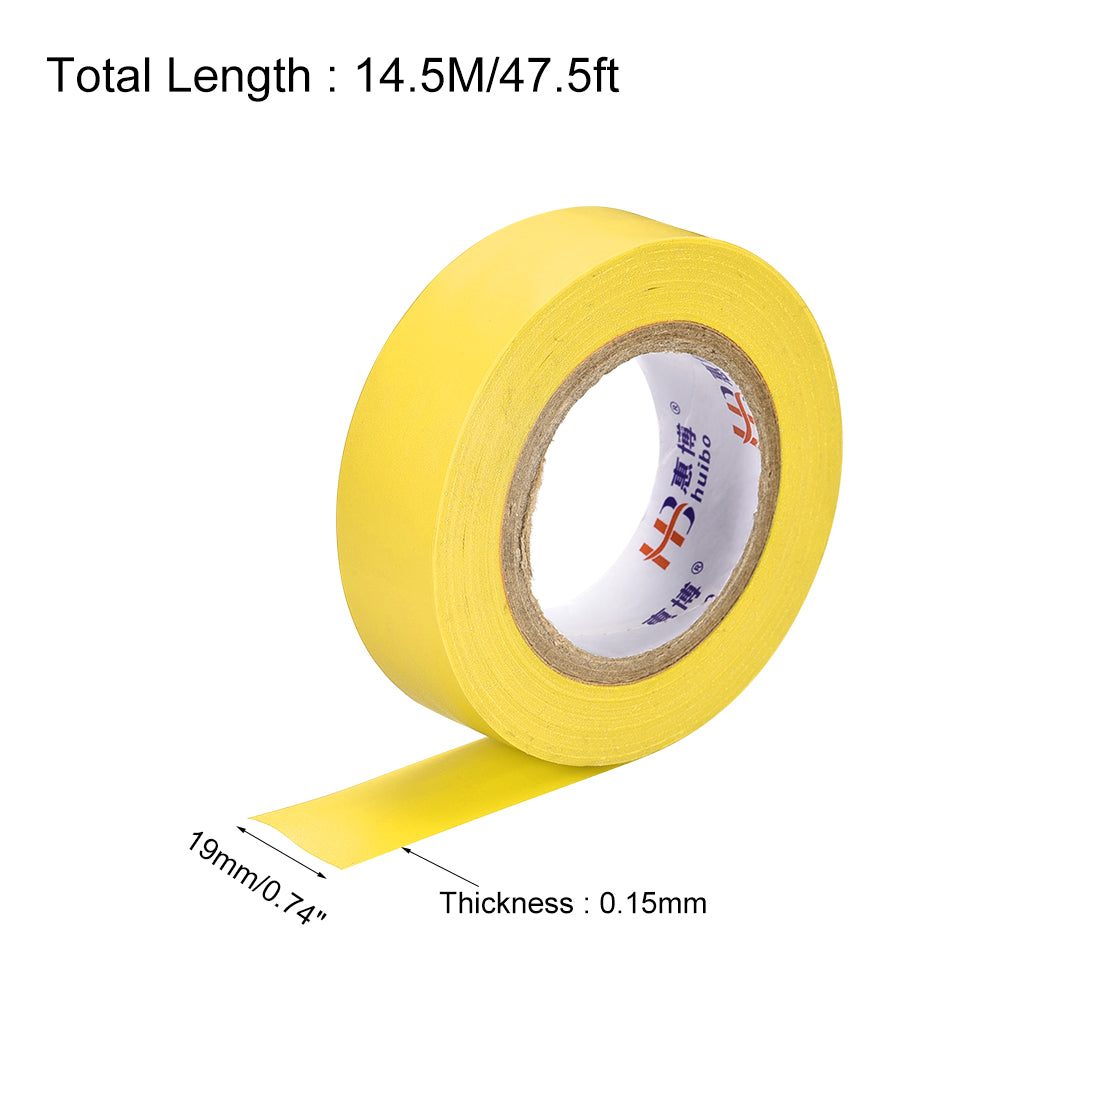 uxcell Uxcell Insulating Tape 19mm Width 14.5M Long 0.15mm Thick PVC Electrical Tape Rated for Max. 400V  80C Use Yellow 2pcs